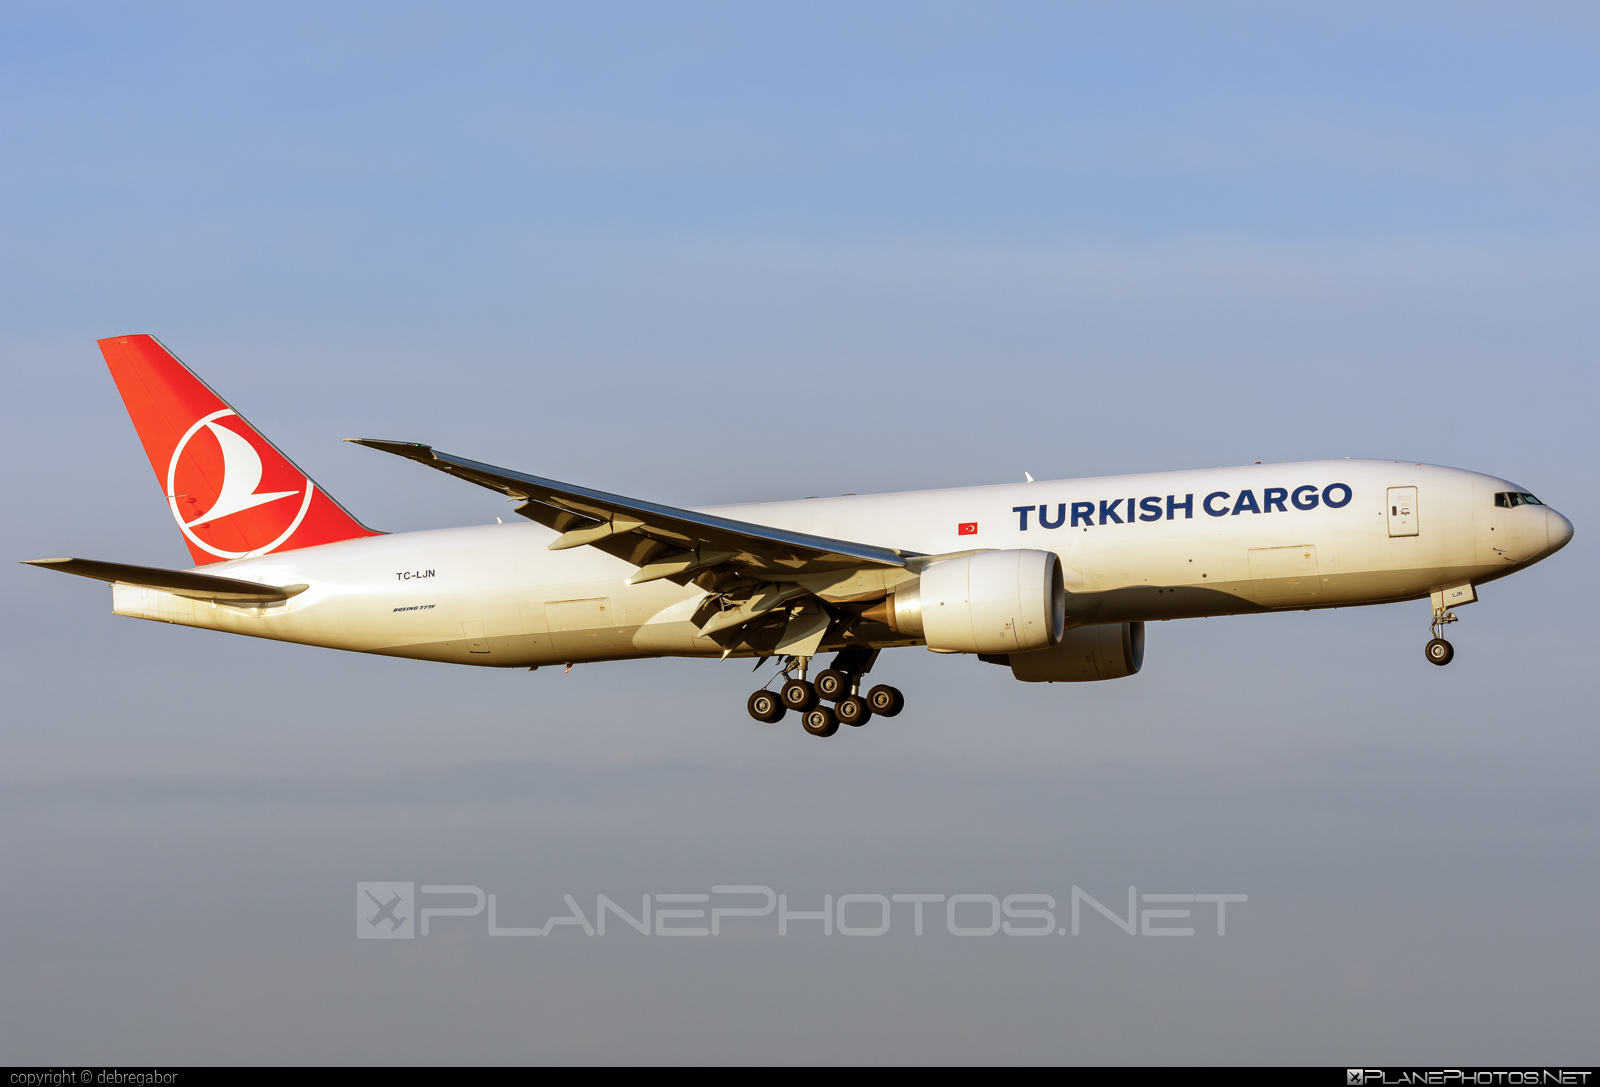 Boeing 777F - TC-LJN operated by Turkish Airlines Cargo #b777 #b777f #b777freighter #boeing #boeing777 #tripleseven #turkishairlinescargo